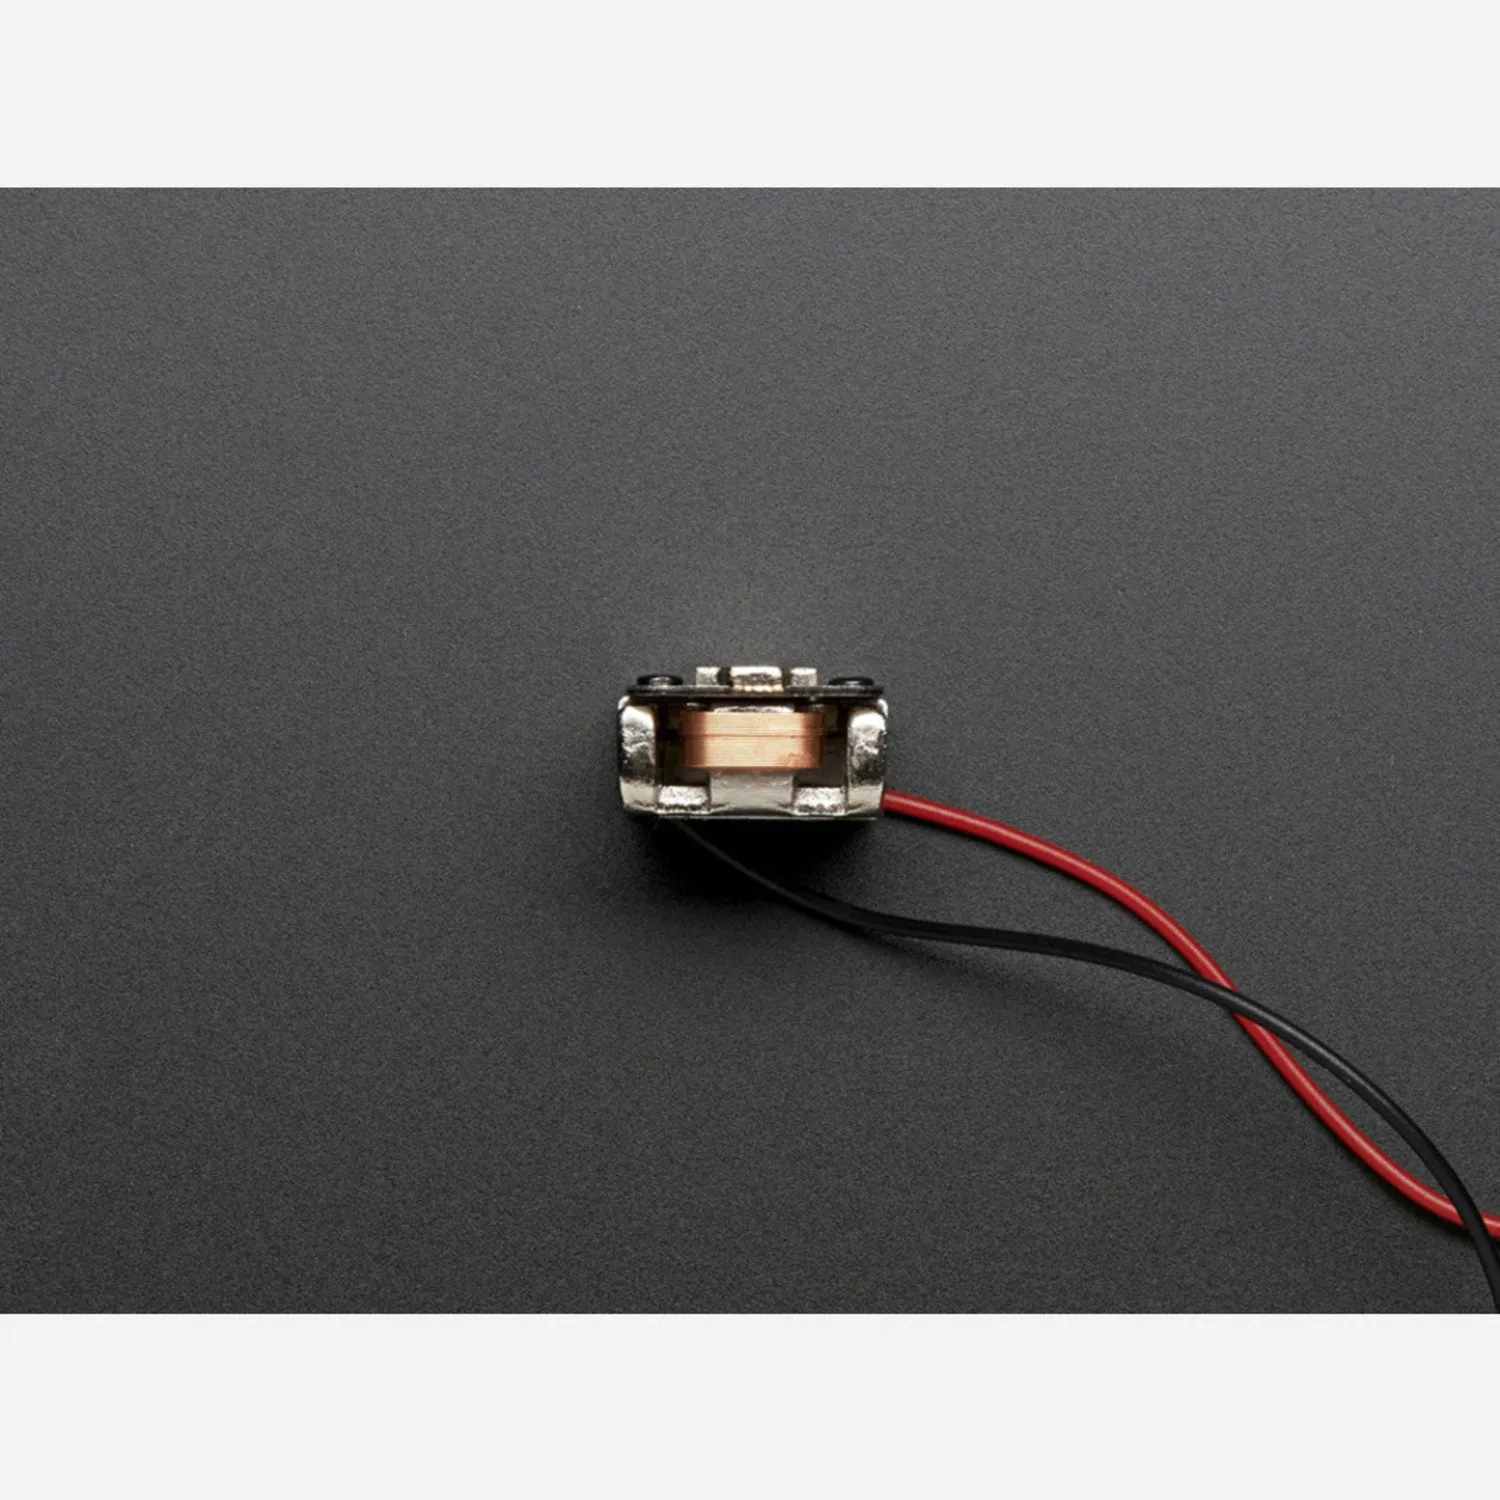 Photo of Bone Conductor Transducer with Wires - 8 Ohm 1 Watt